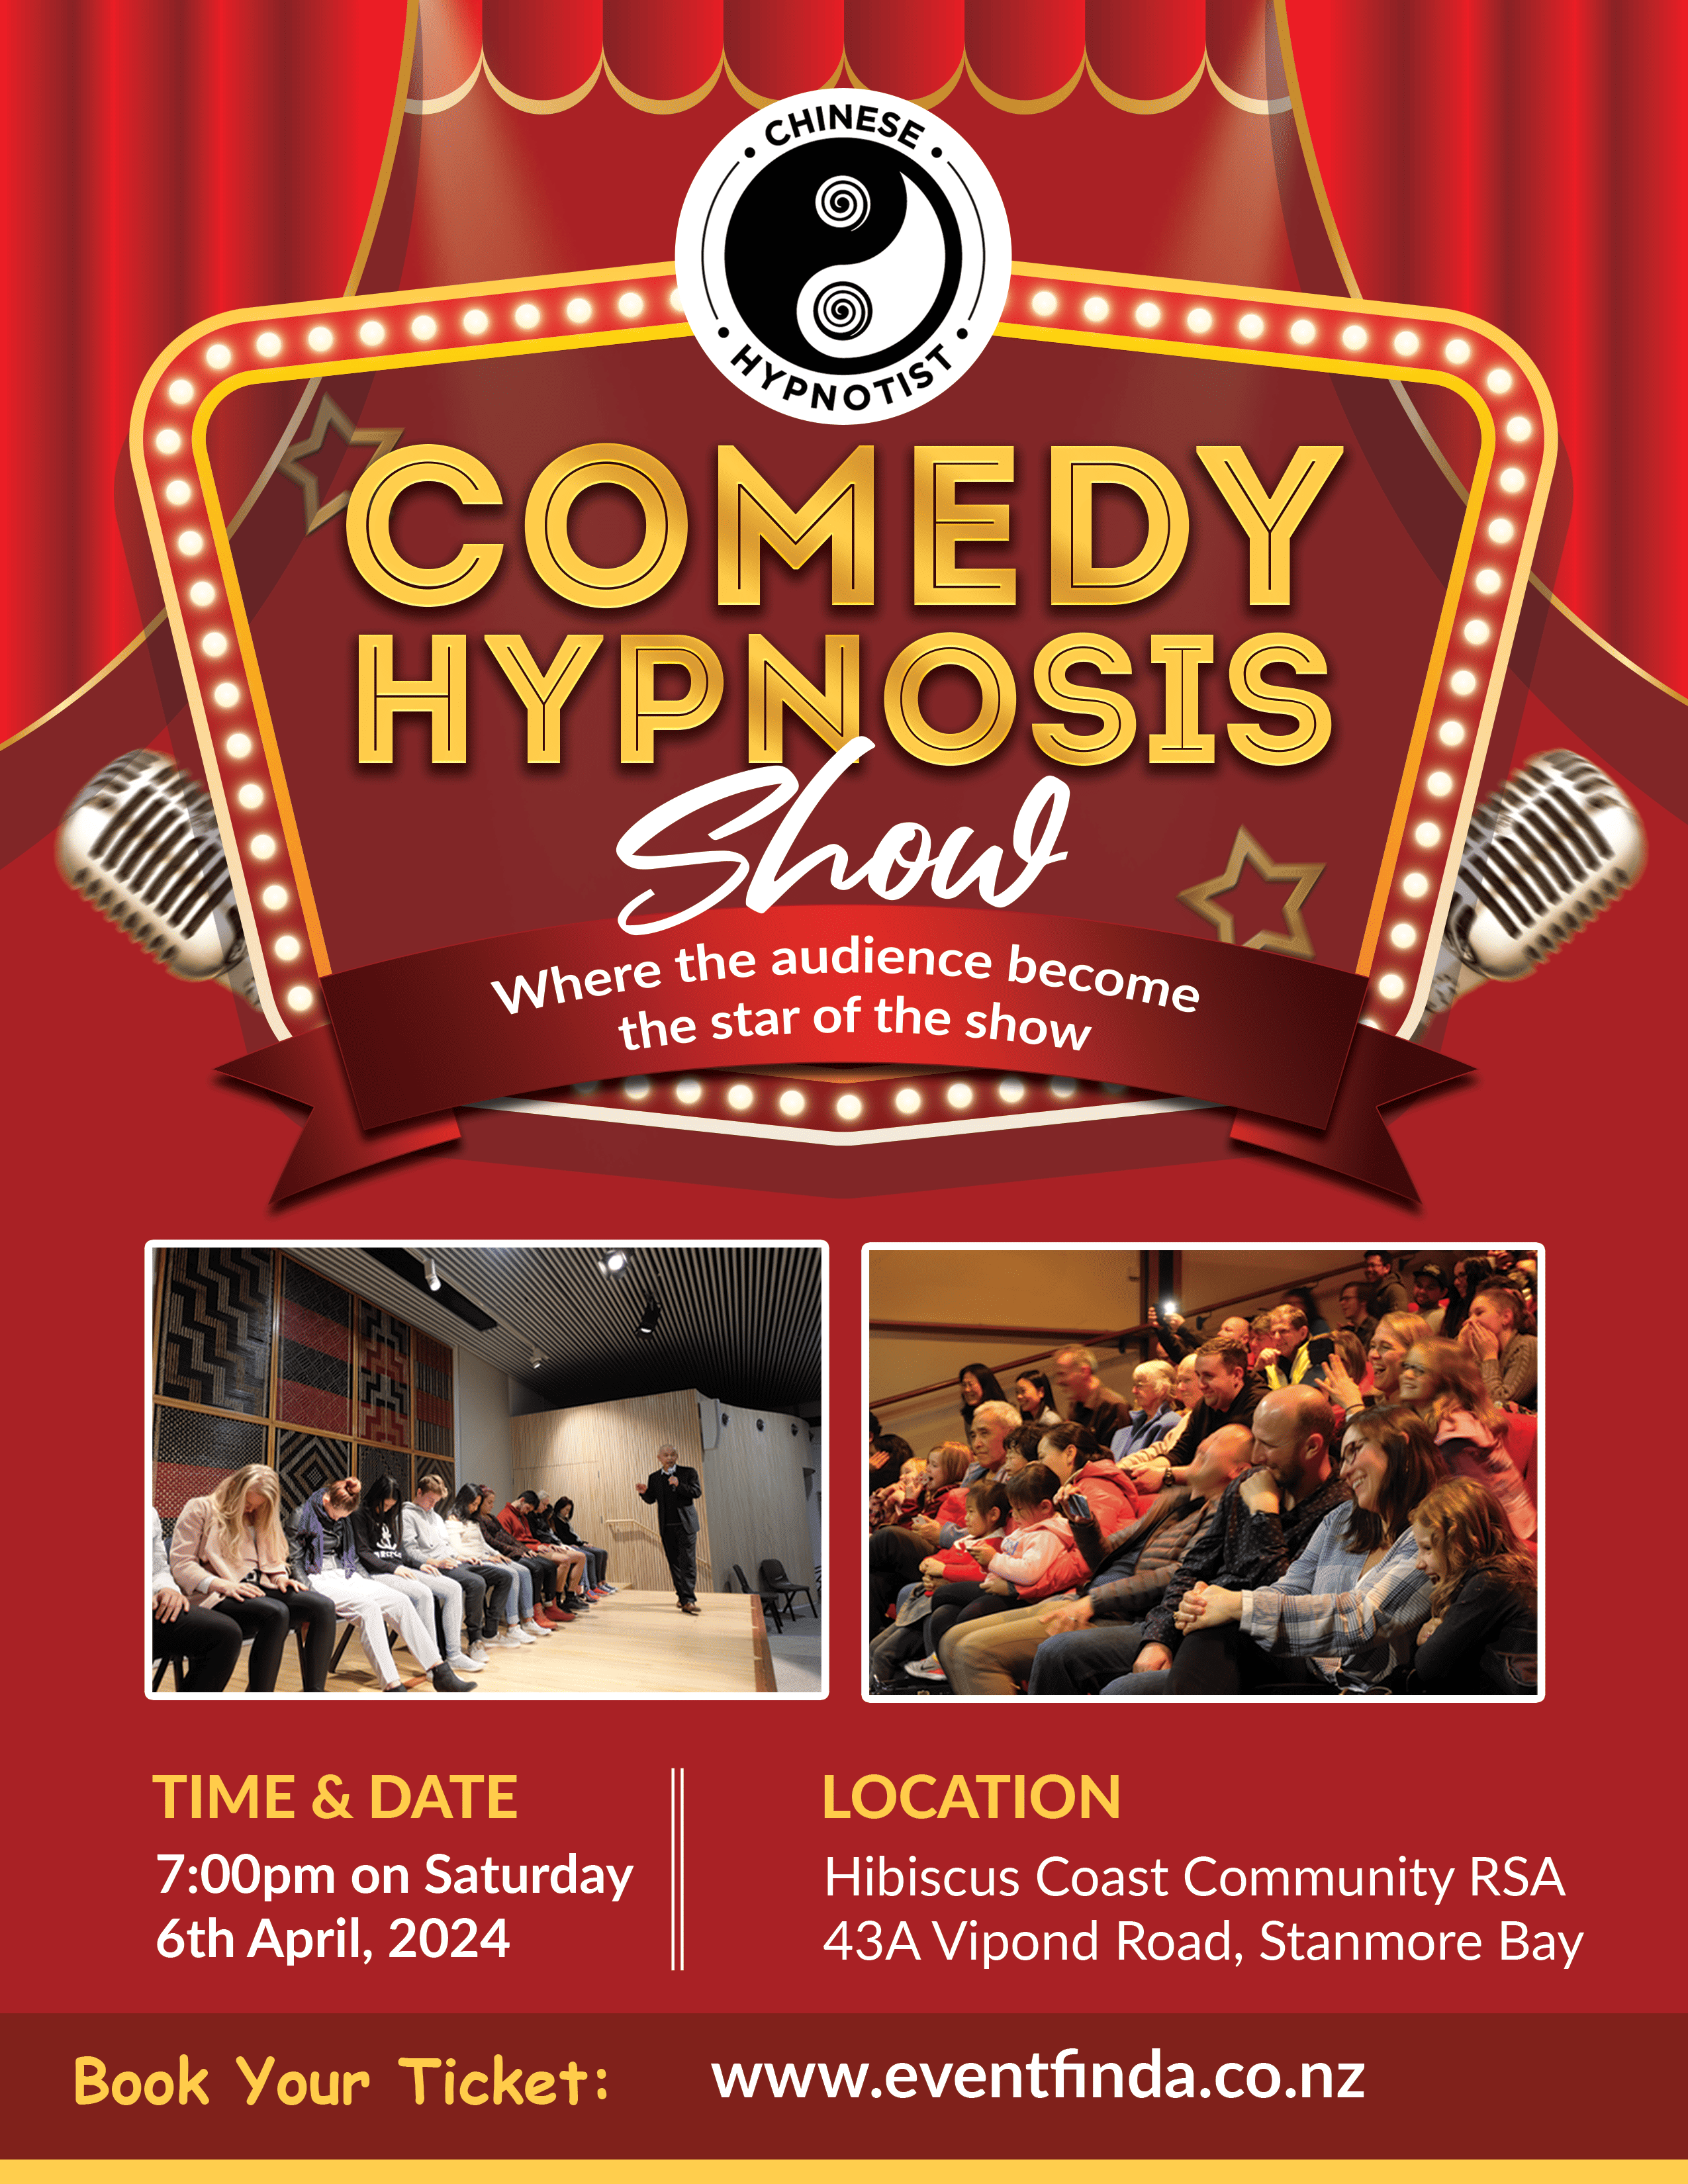 Comedy Hypnosis Show flyer with event details and audience photo.